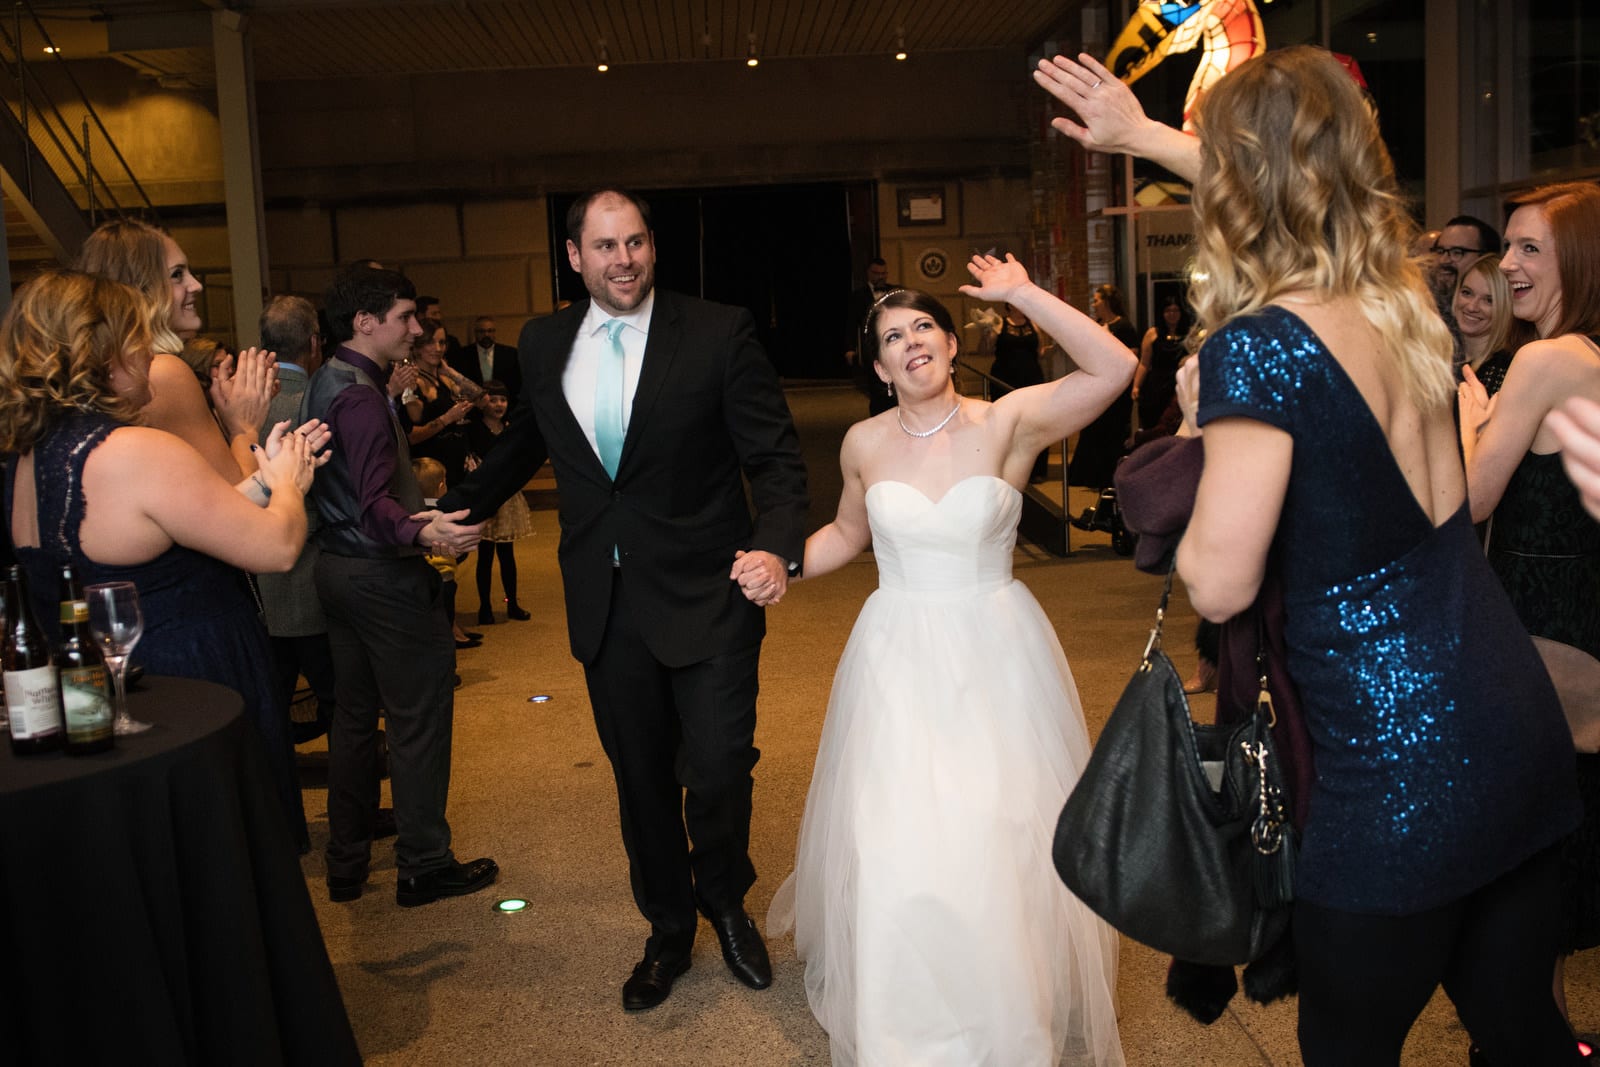 A bride reaches up to give a high five to a guest in a blue dress as she and her groom walk together after their Children's Museum Pittsburgh Wedding.